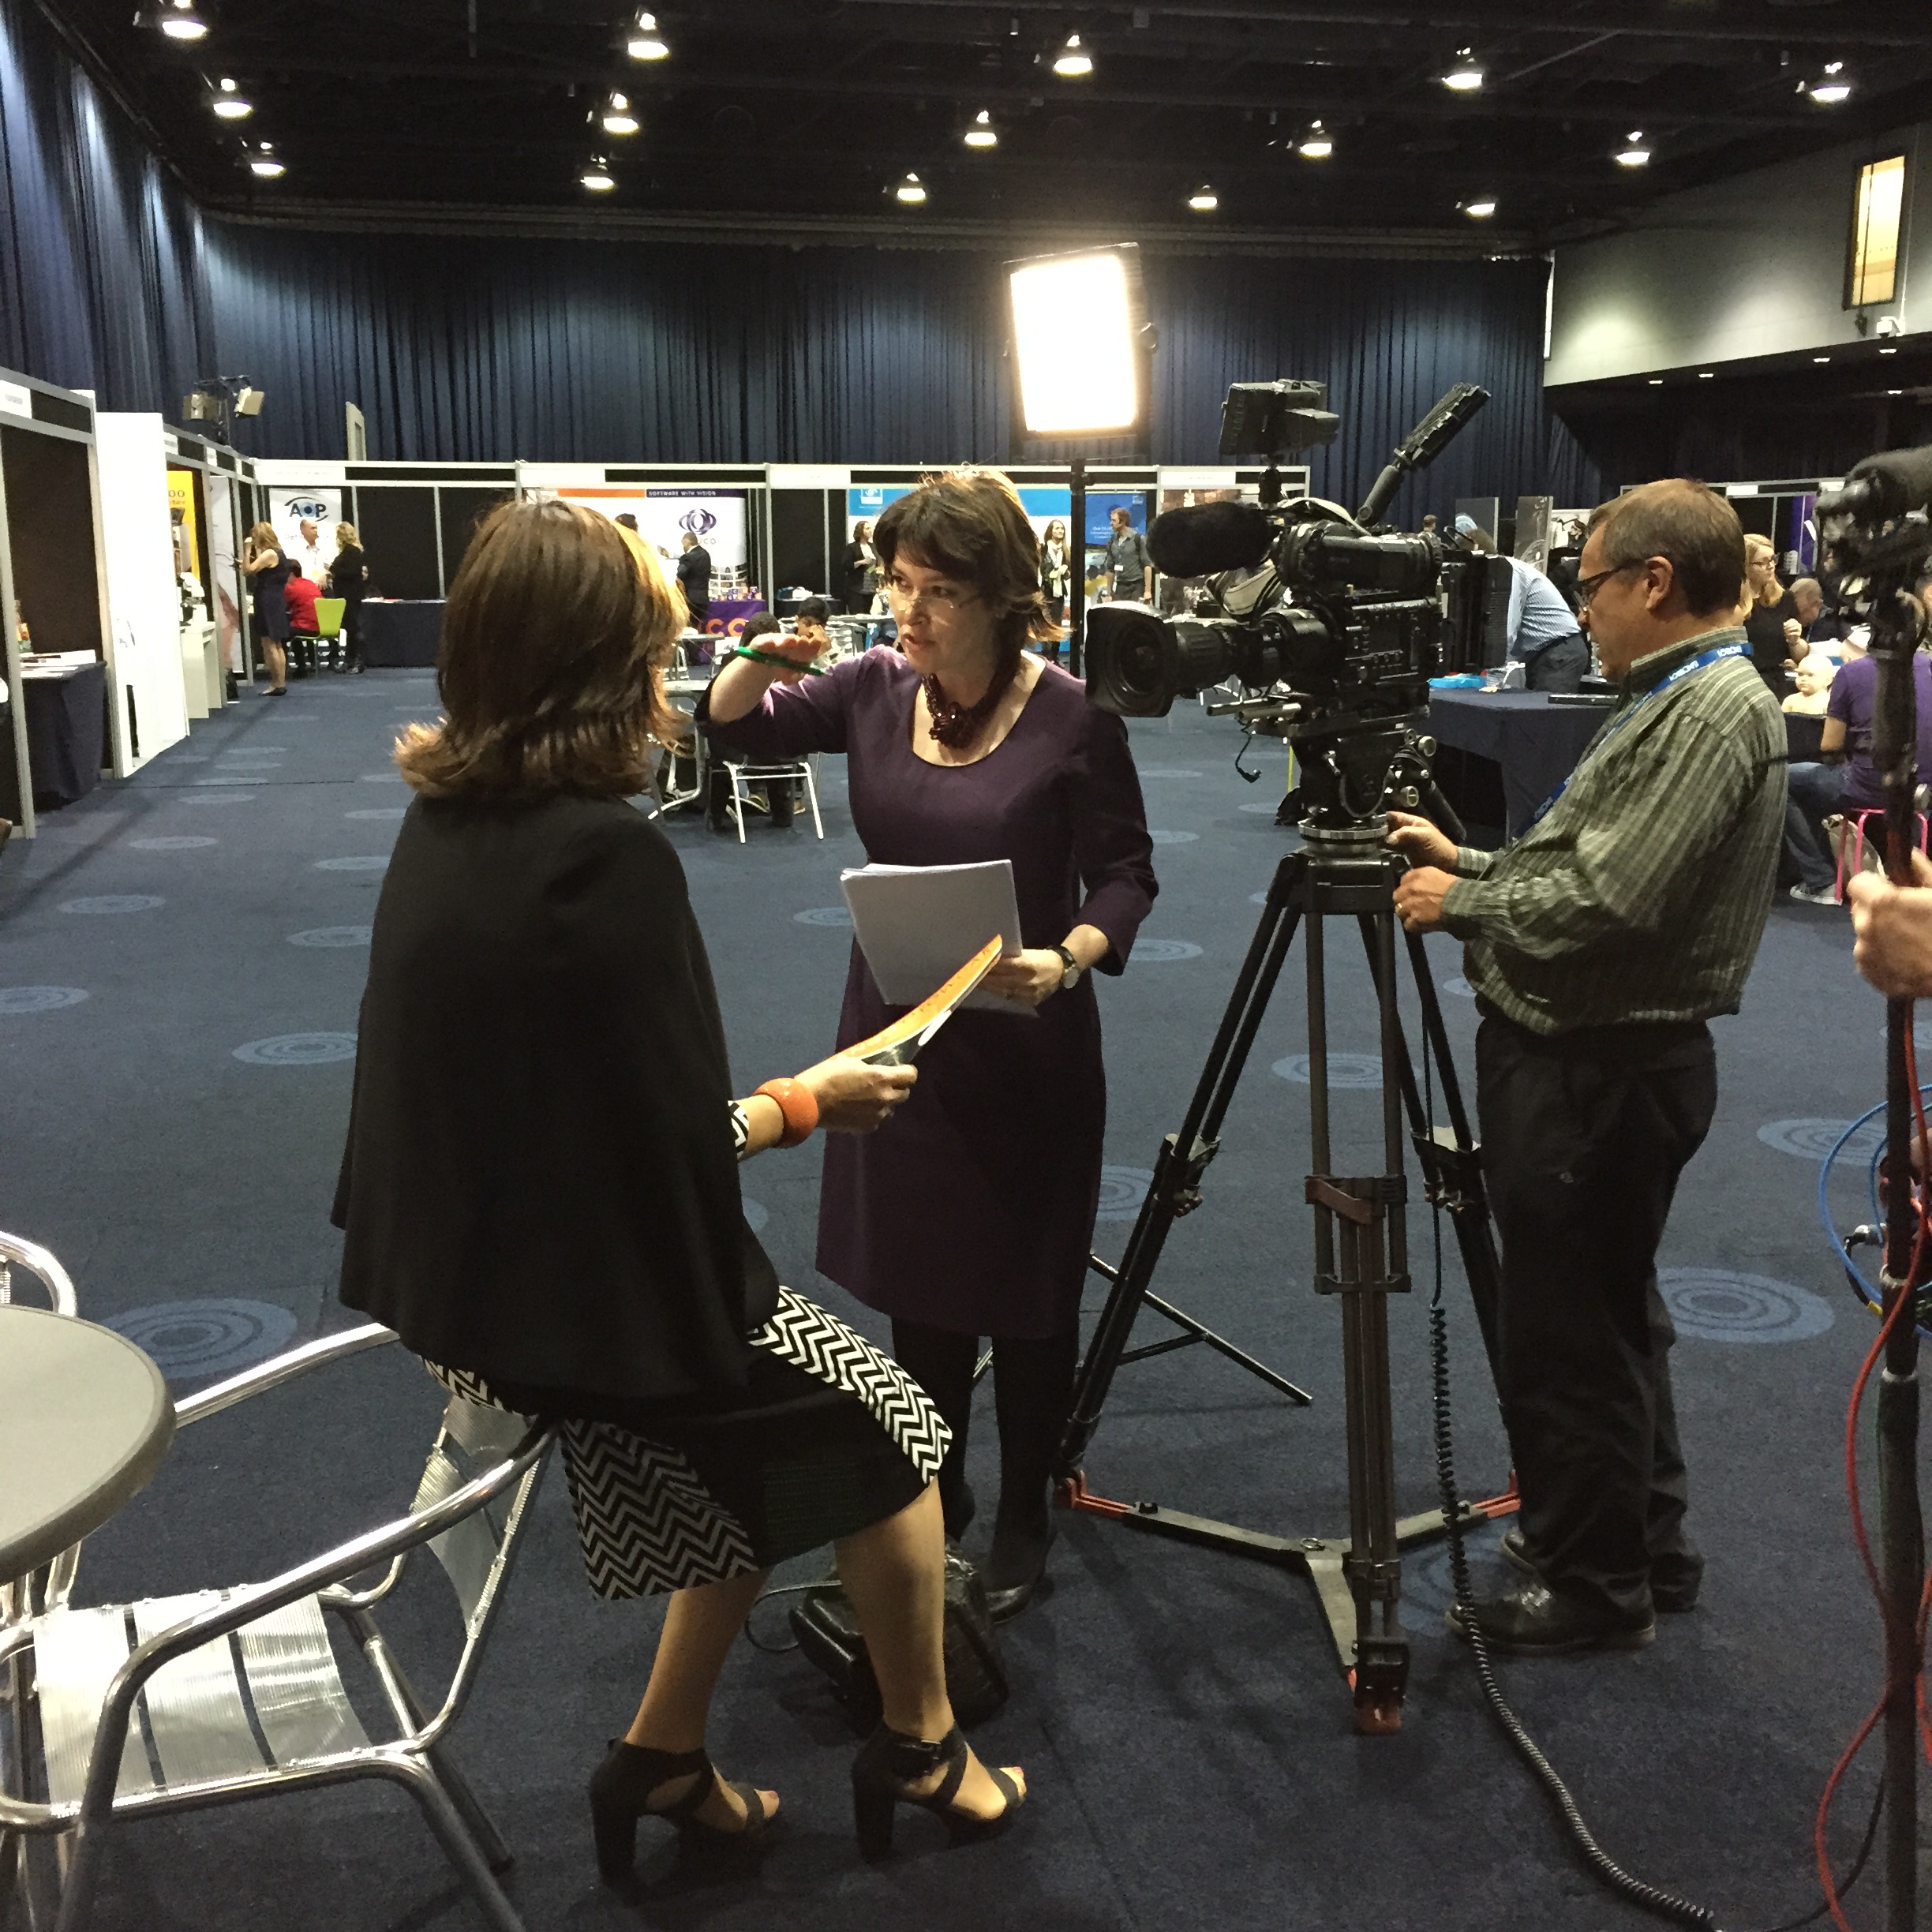 Sarah Lockett with camera crew filming at a conference